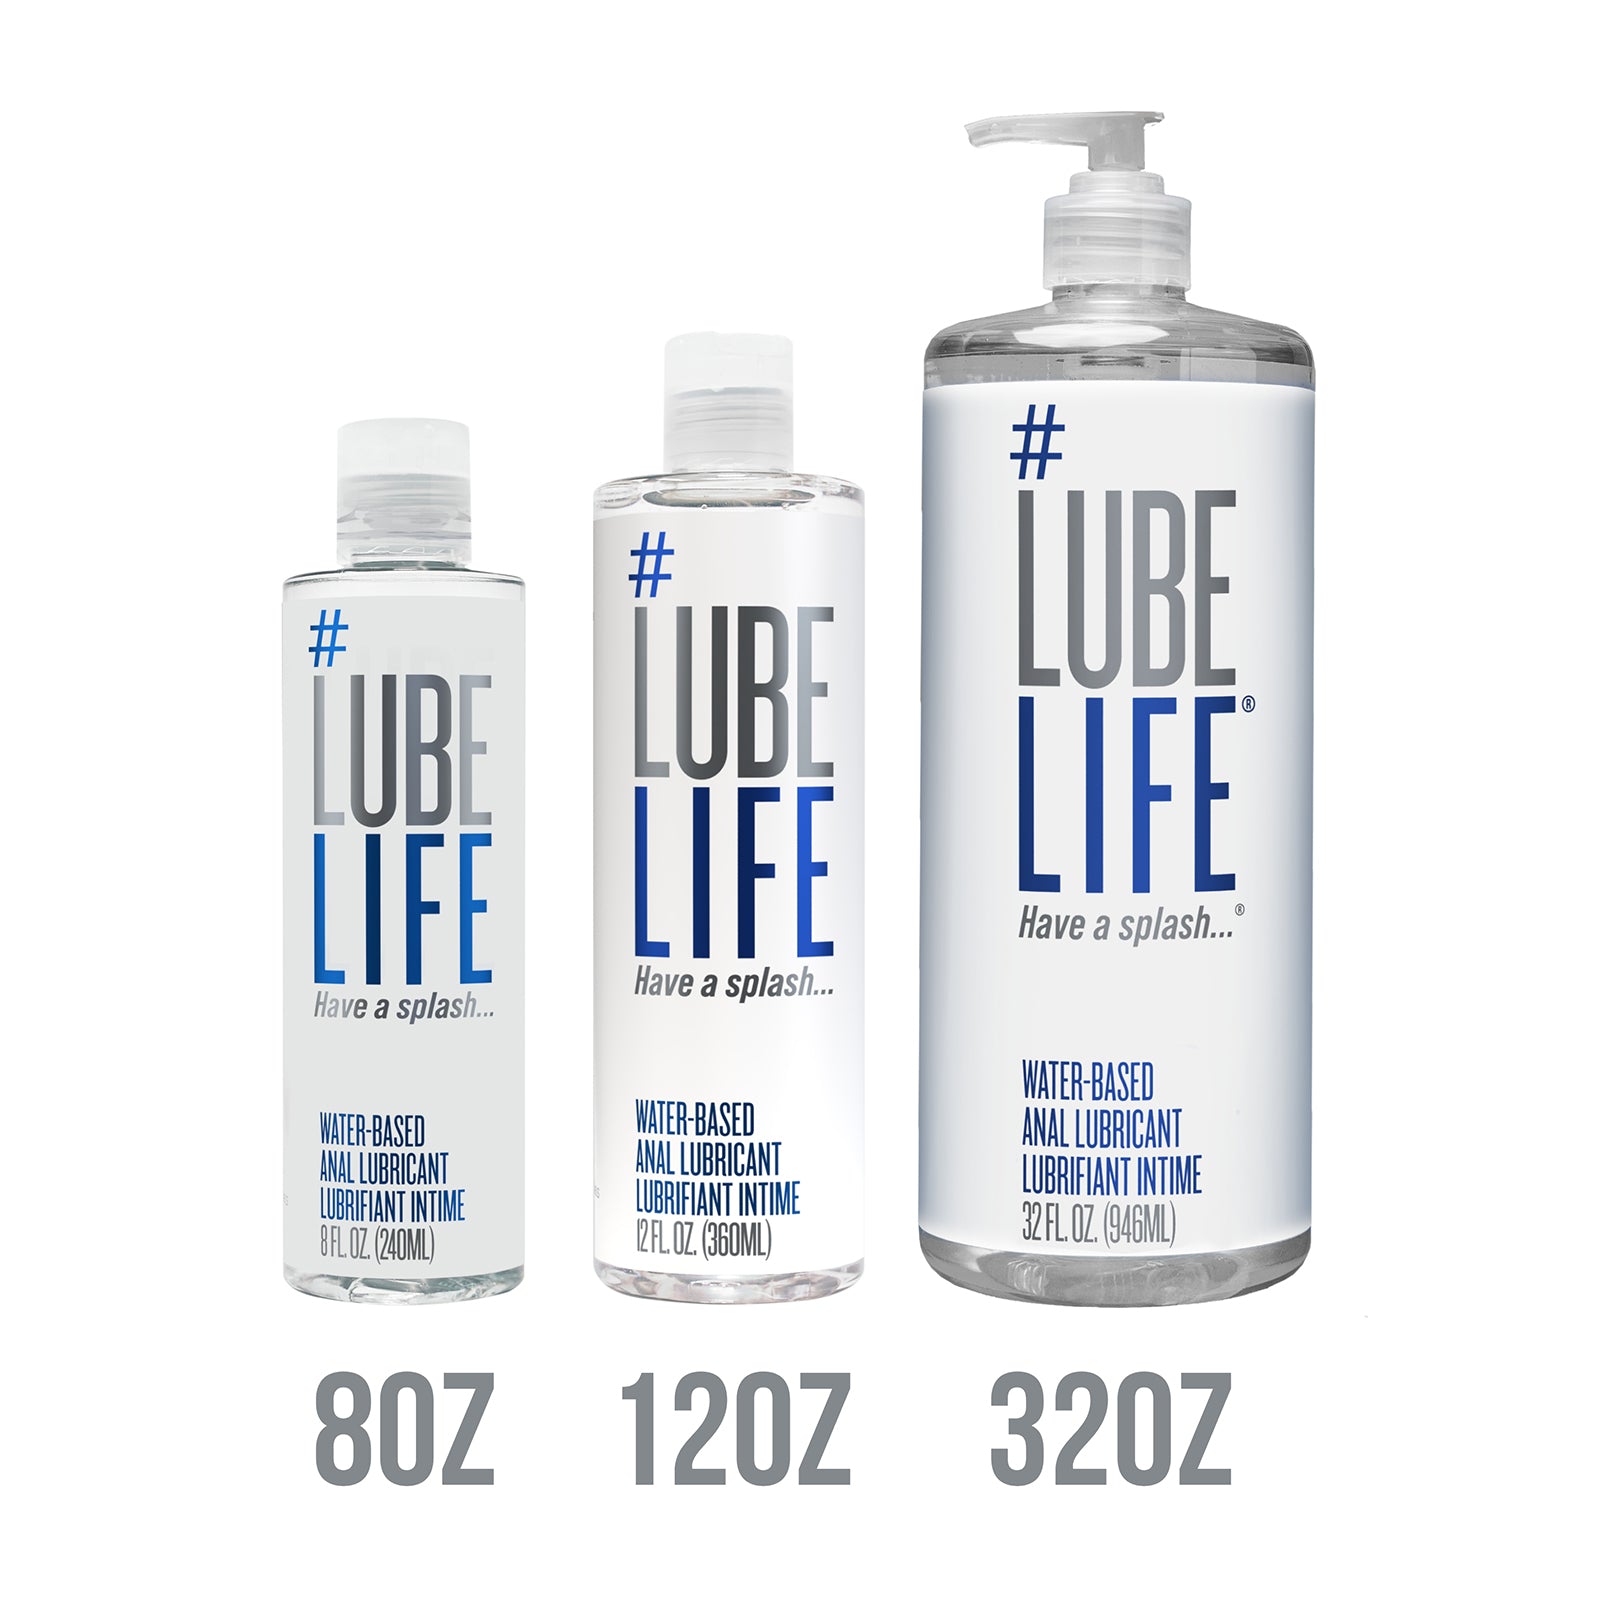 LubeLife Water Based Personal Lubricant, 8 oz Sex Lube for Men